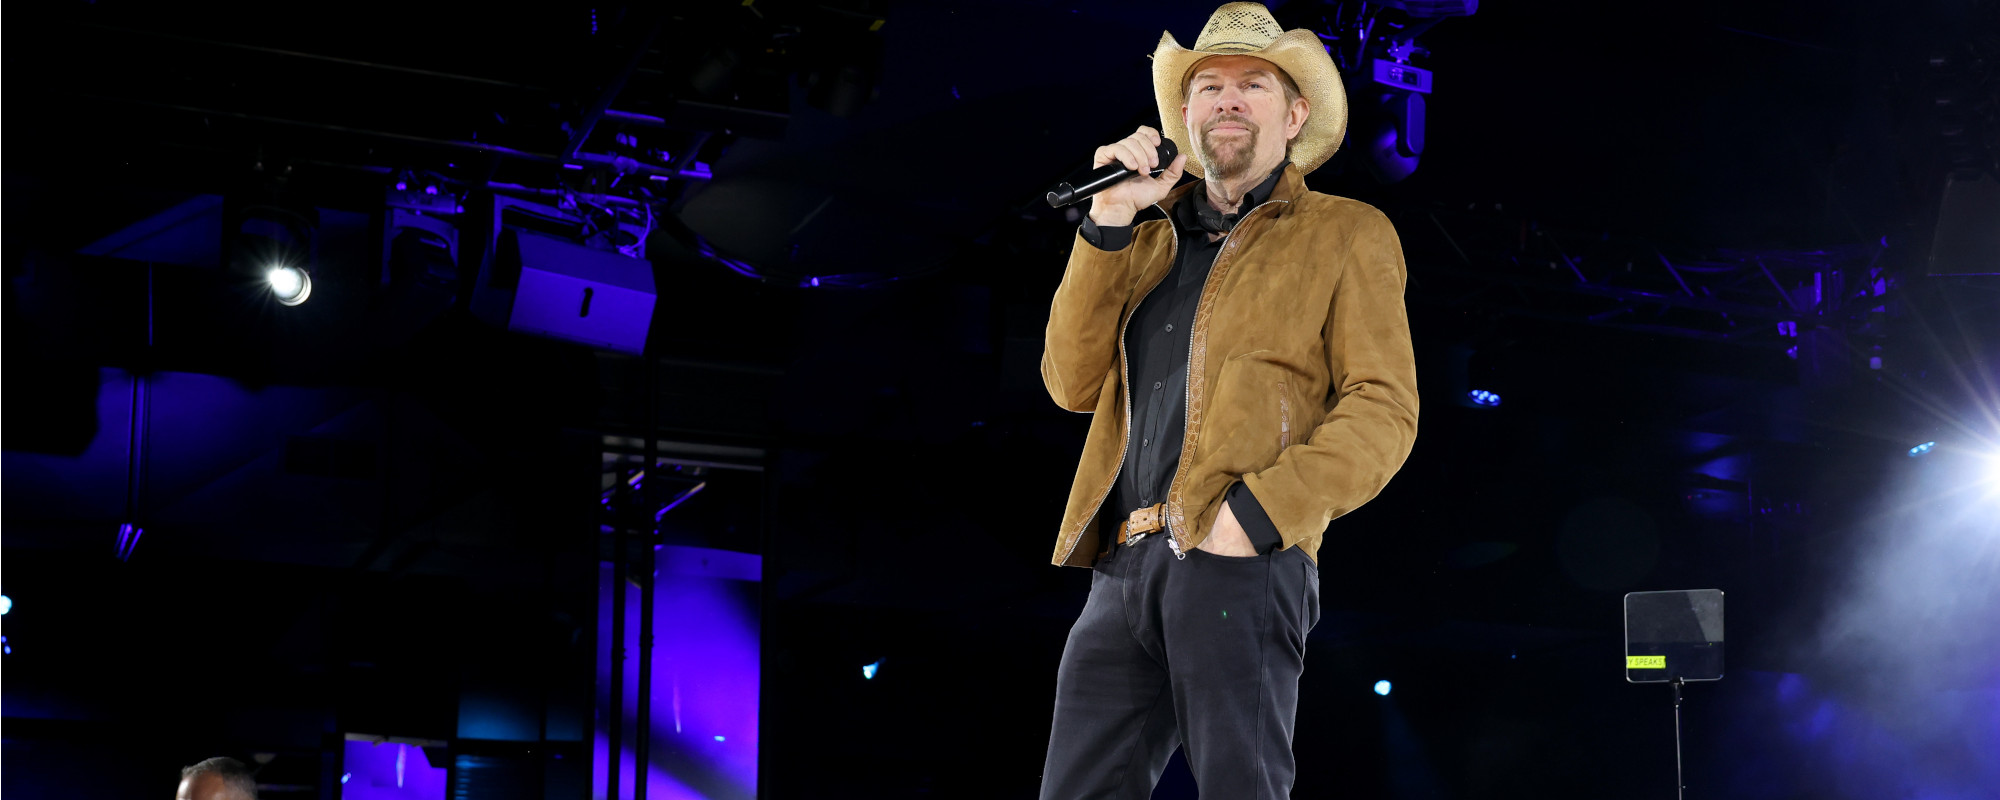 Toby Keith Details Challenges of Singing After Stomach Surgery, Provides Health Update